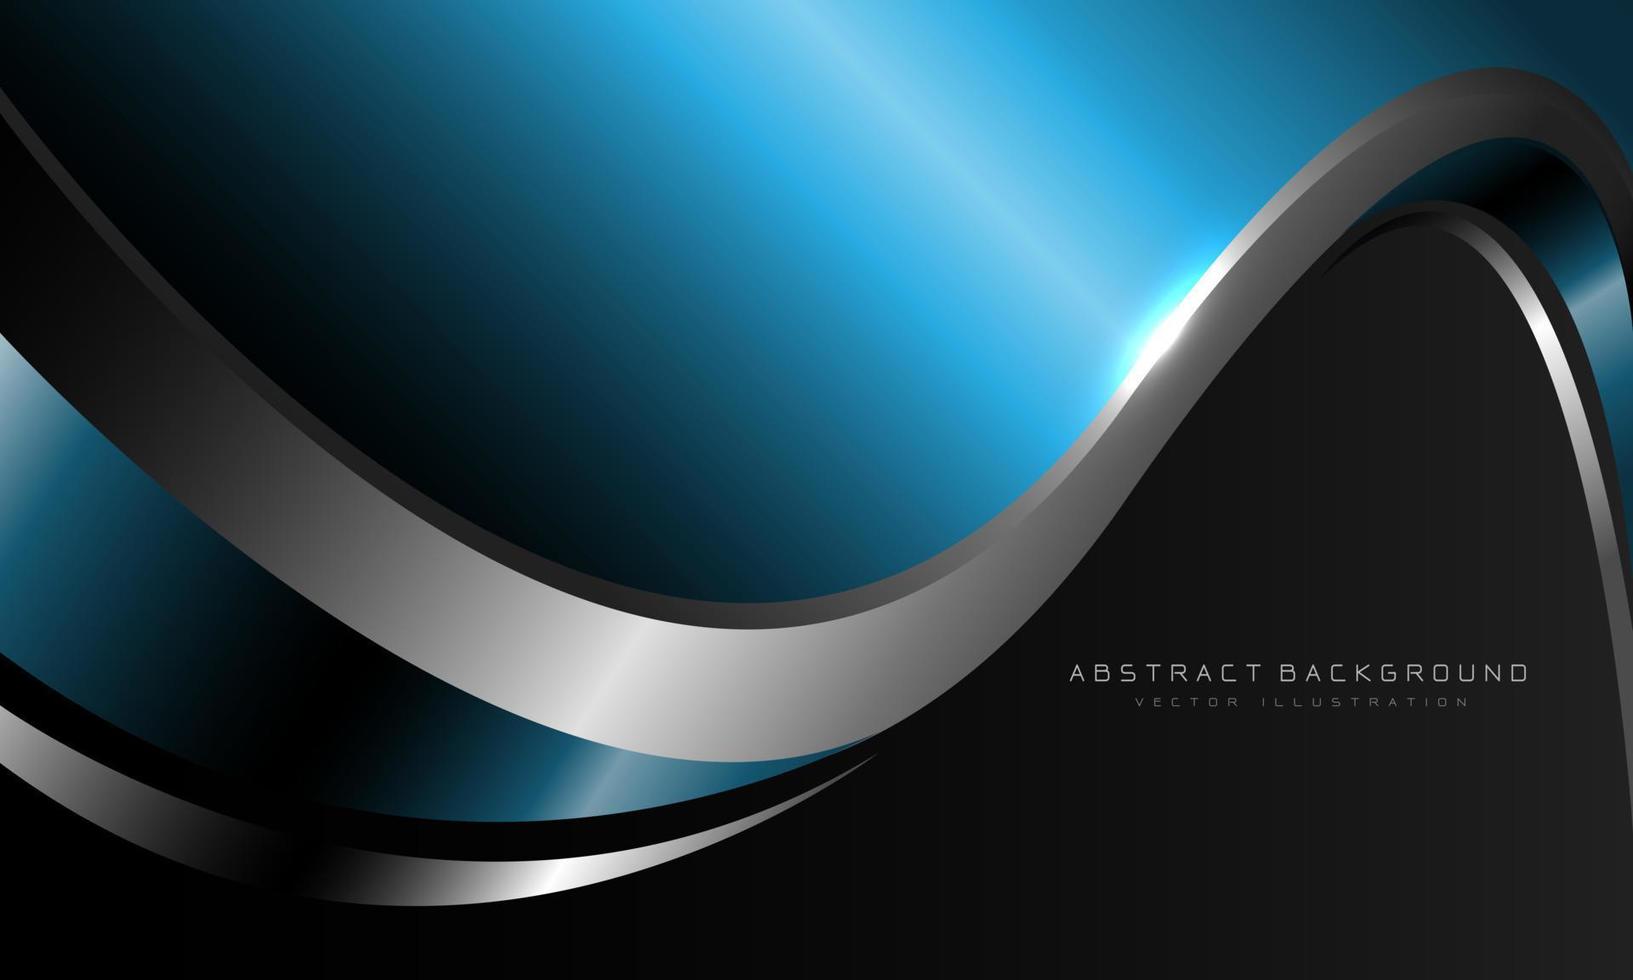 Abstract blue metallic curve with silver line on dark grey design modern luxury futuristic background vector